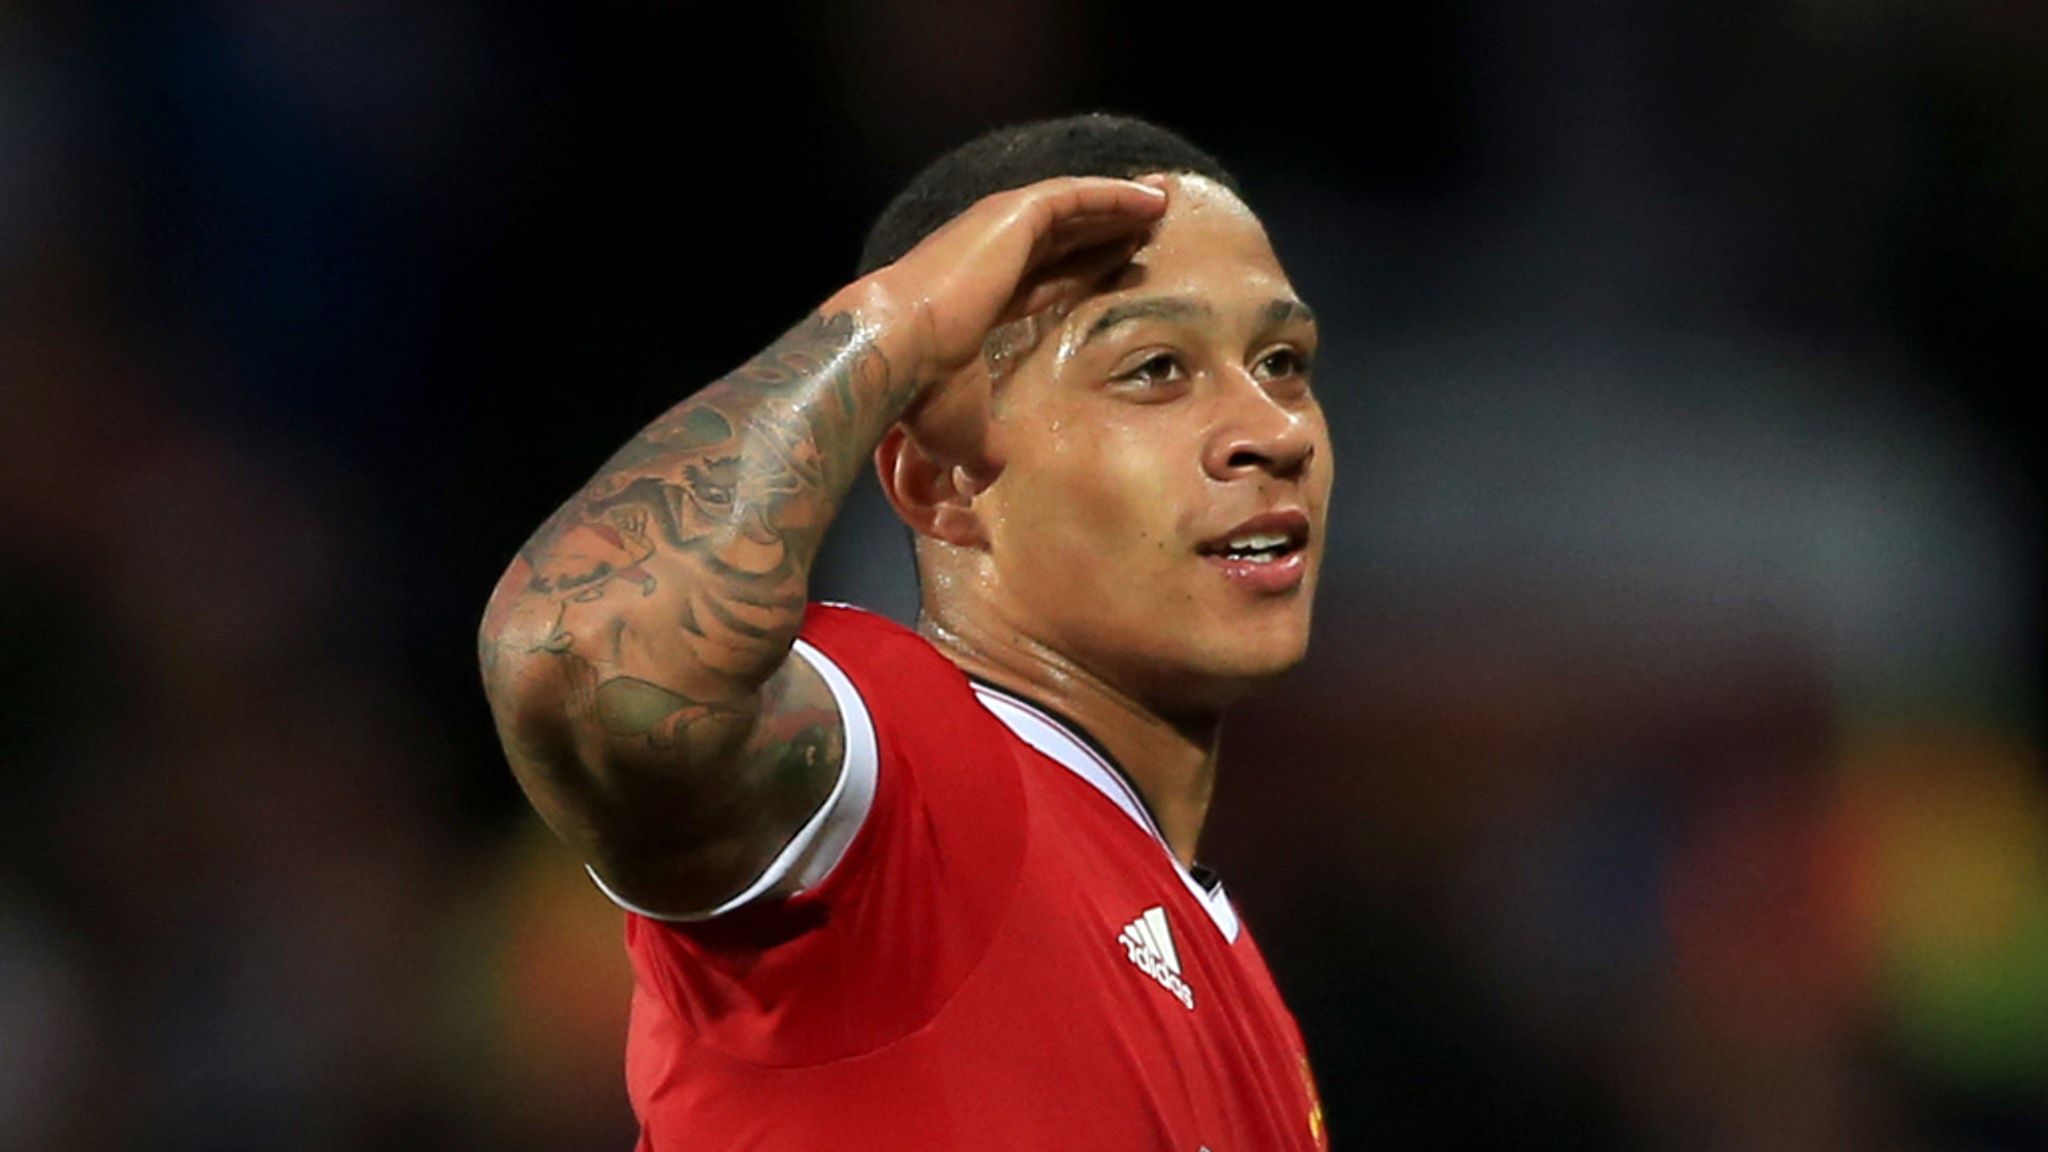 Memphis Depay is Manchester United's new showman, shining in the